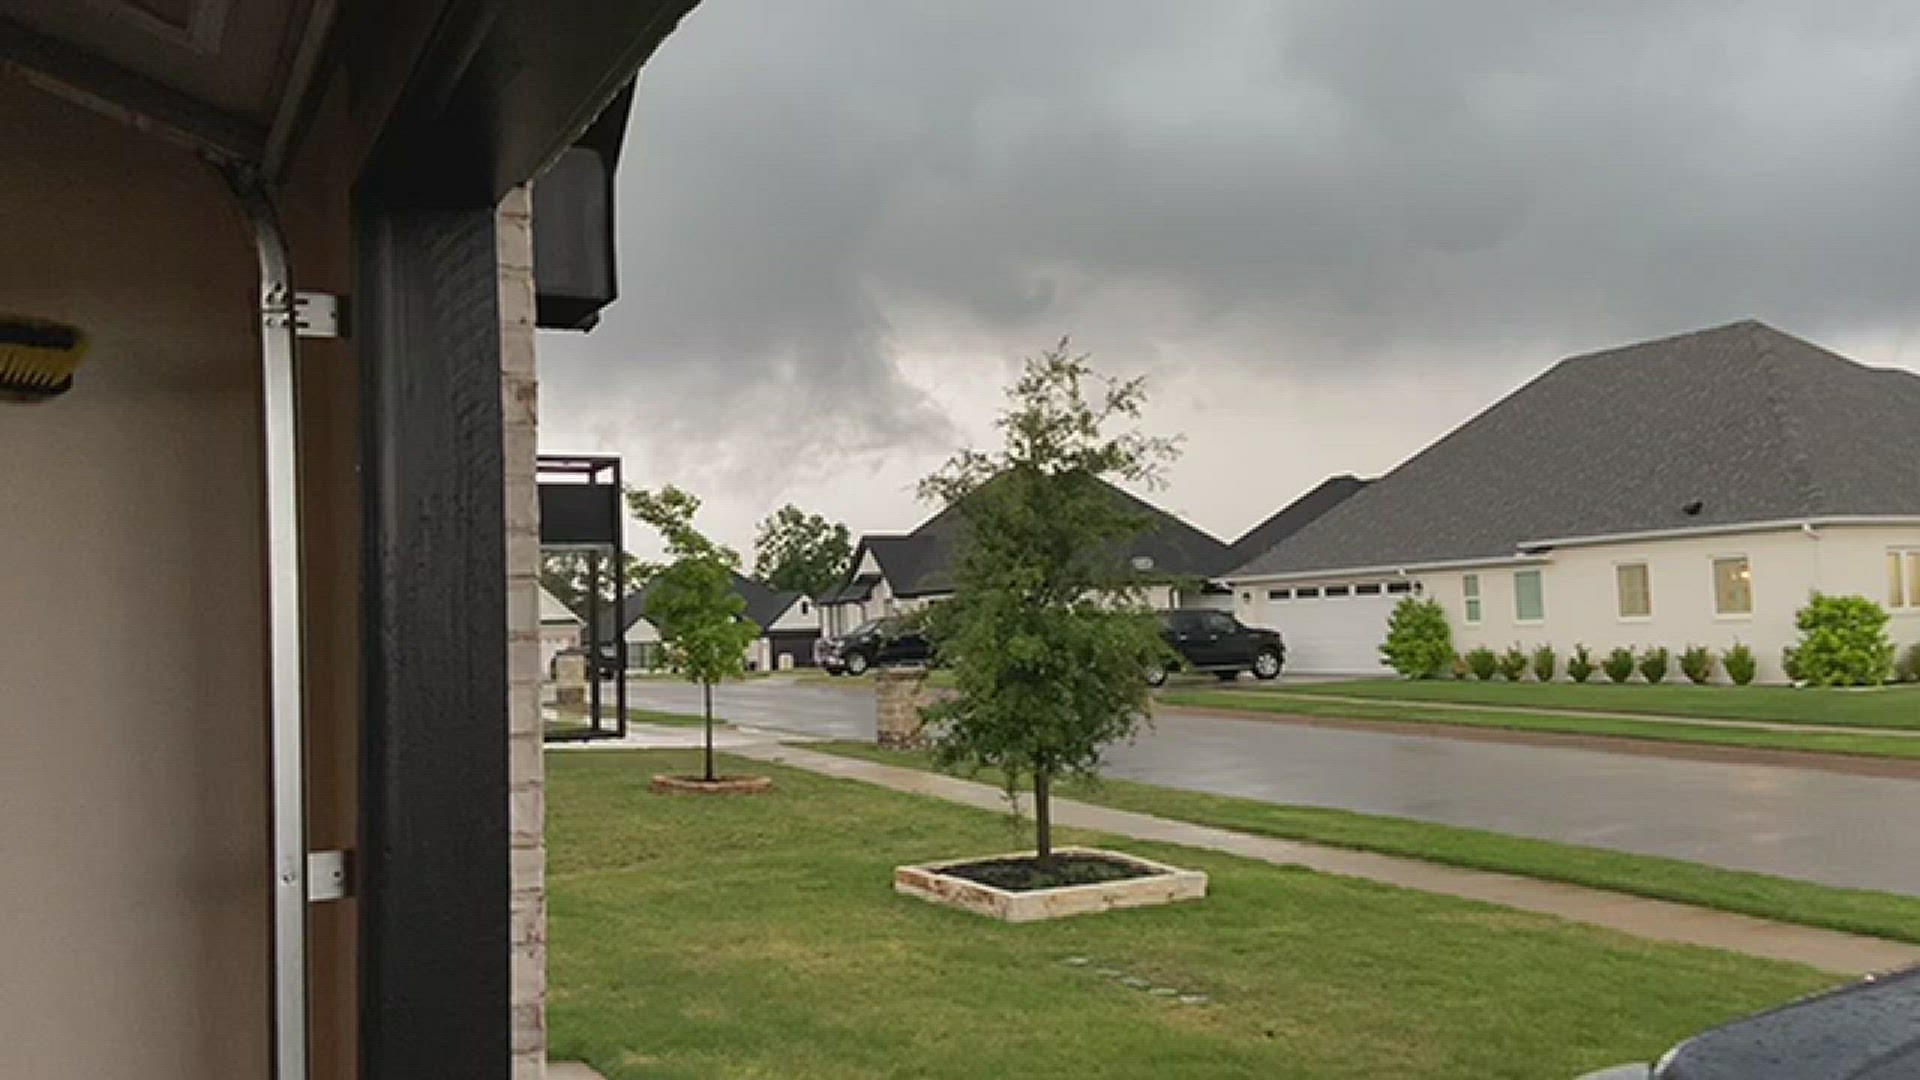 This video was taken from a neighborhood off Old Jacksonville Highway in Tyler.